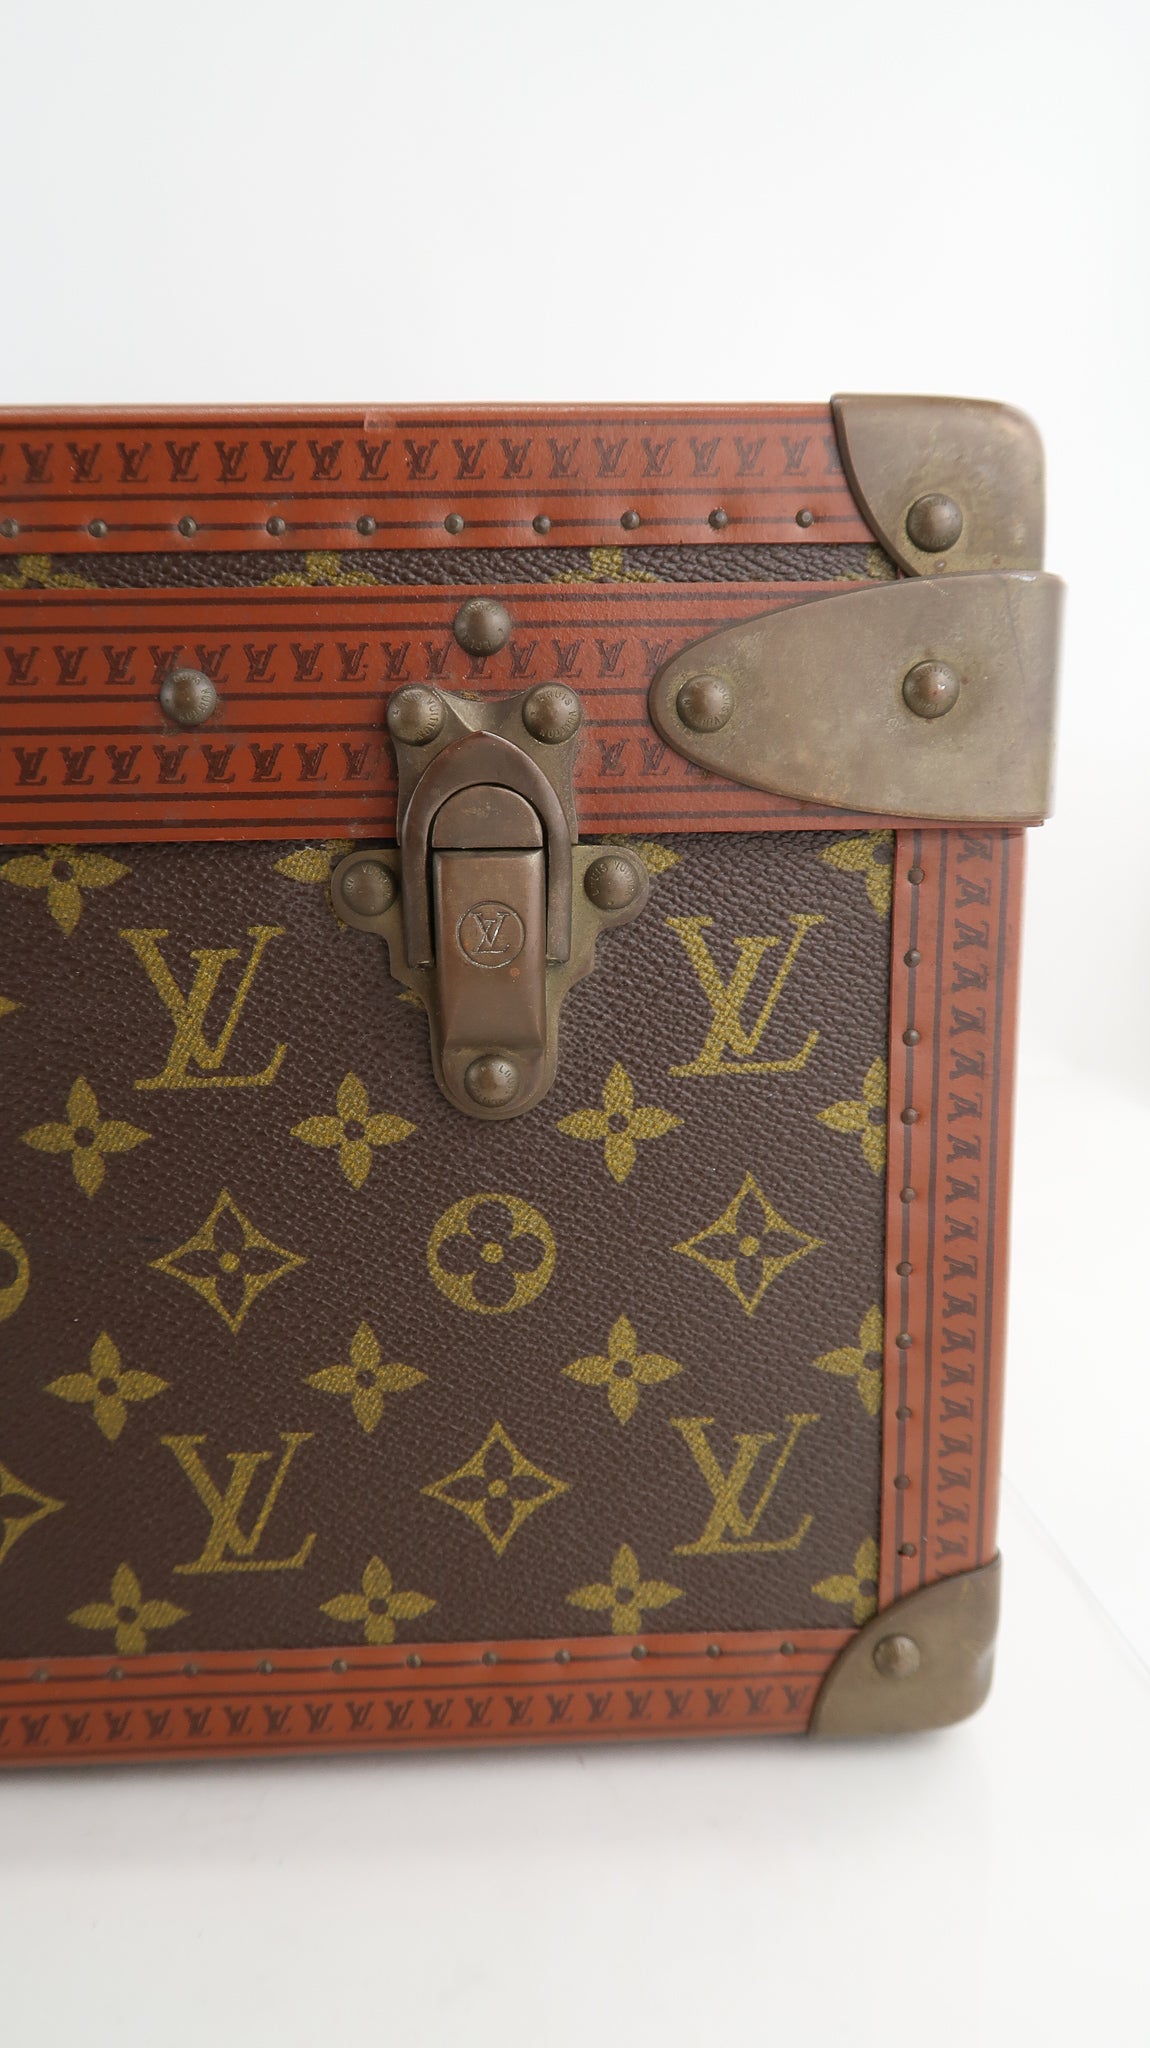 This Louis Vuitton monogrammed suitcase is type Alzer 65